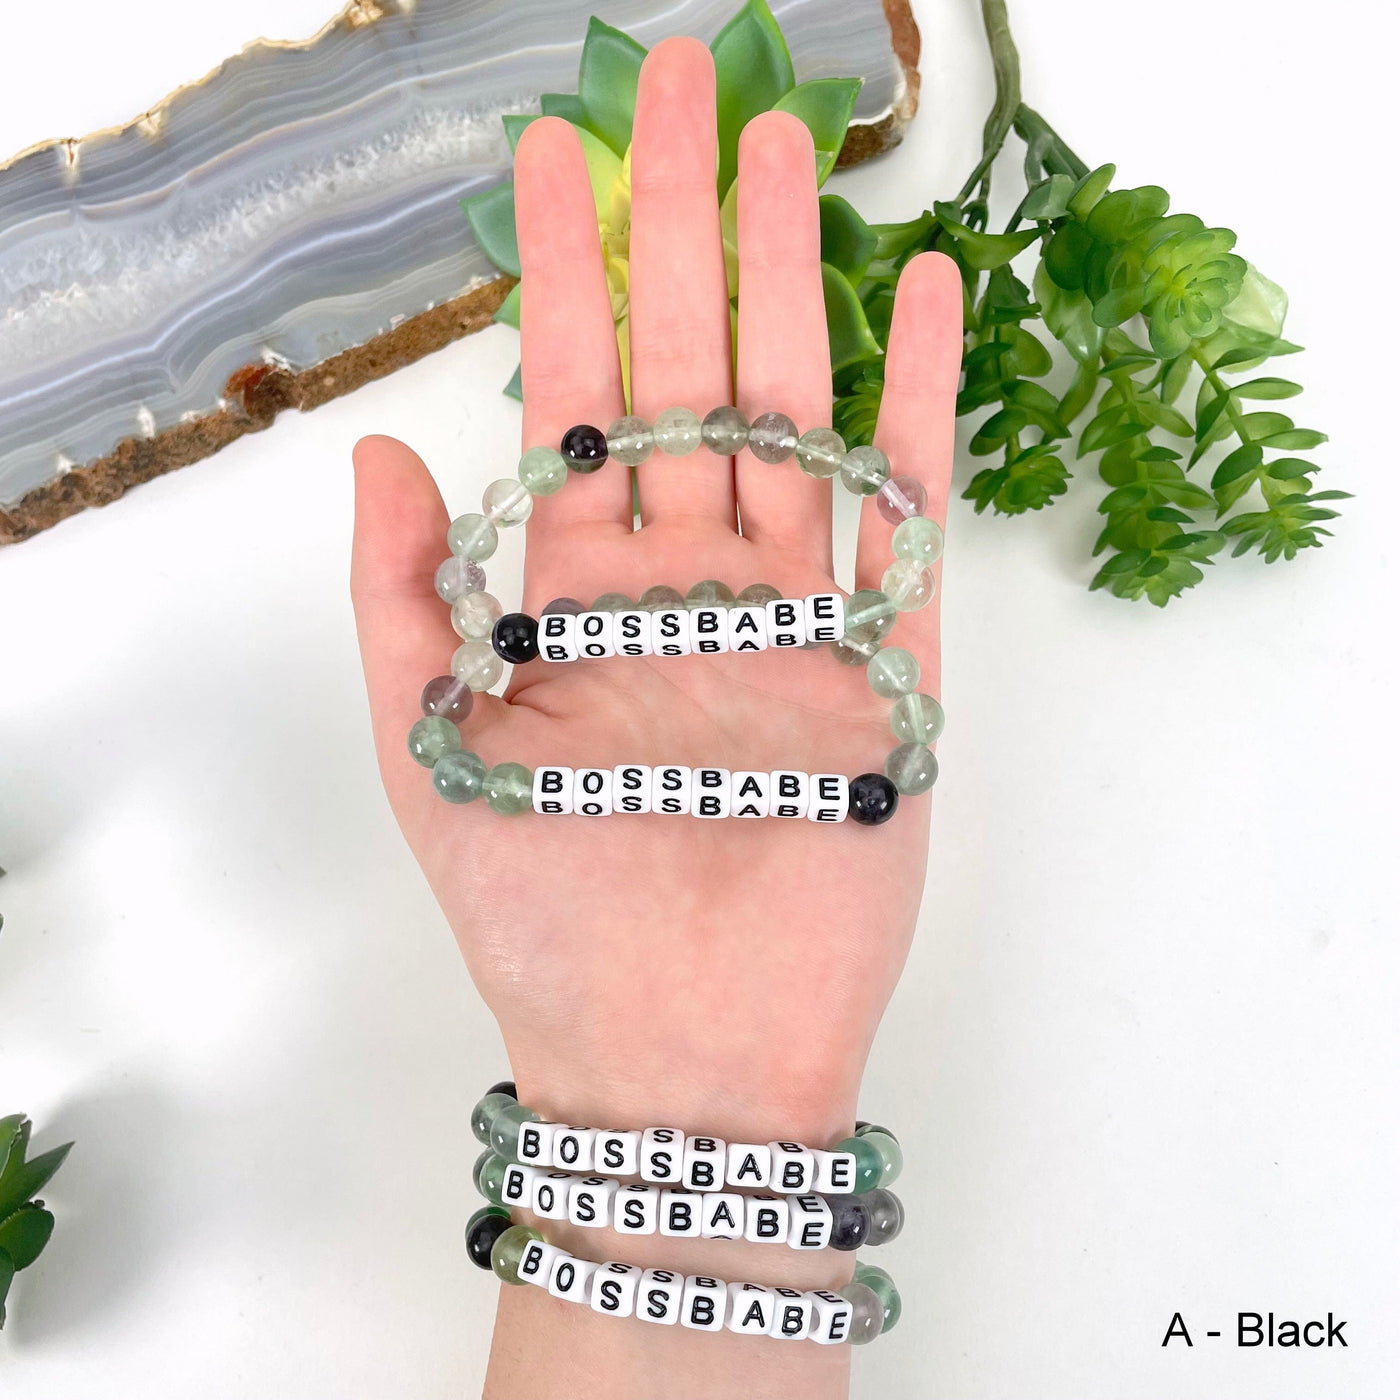 black "BOSSBABE" letter bead option in hand and on wrist for color reference